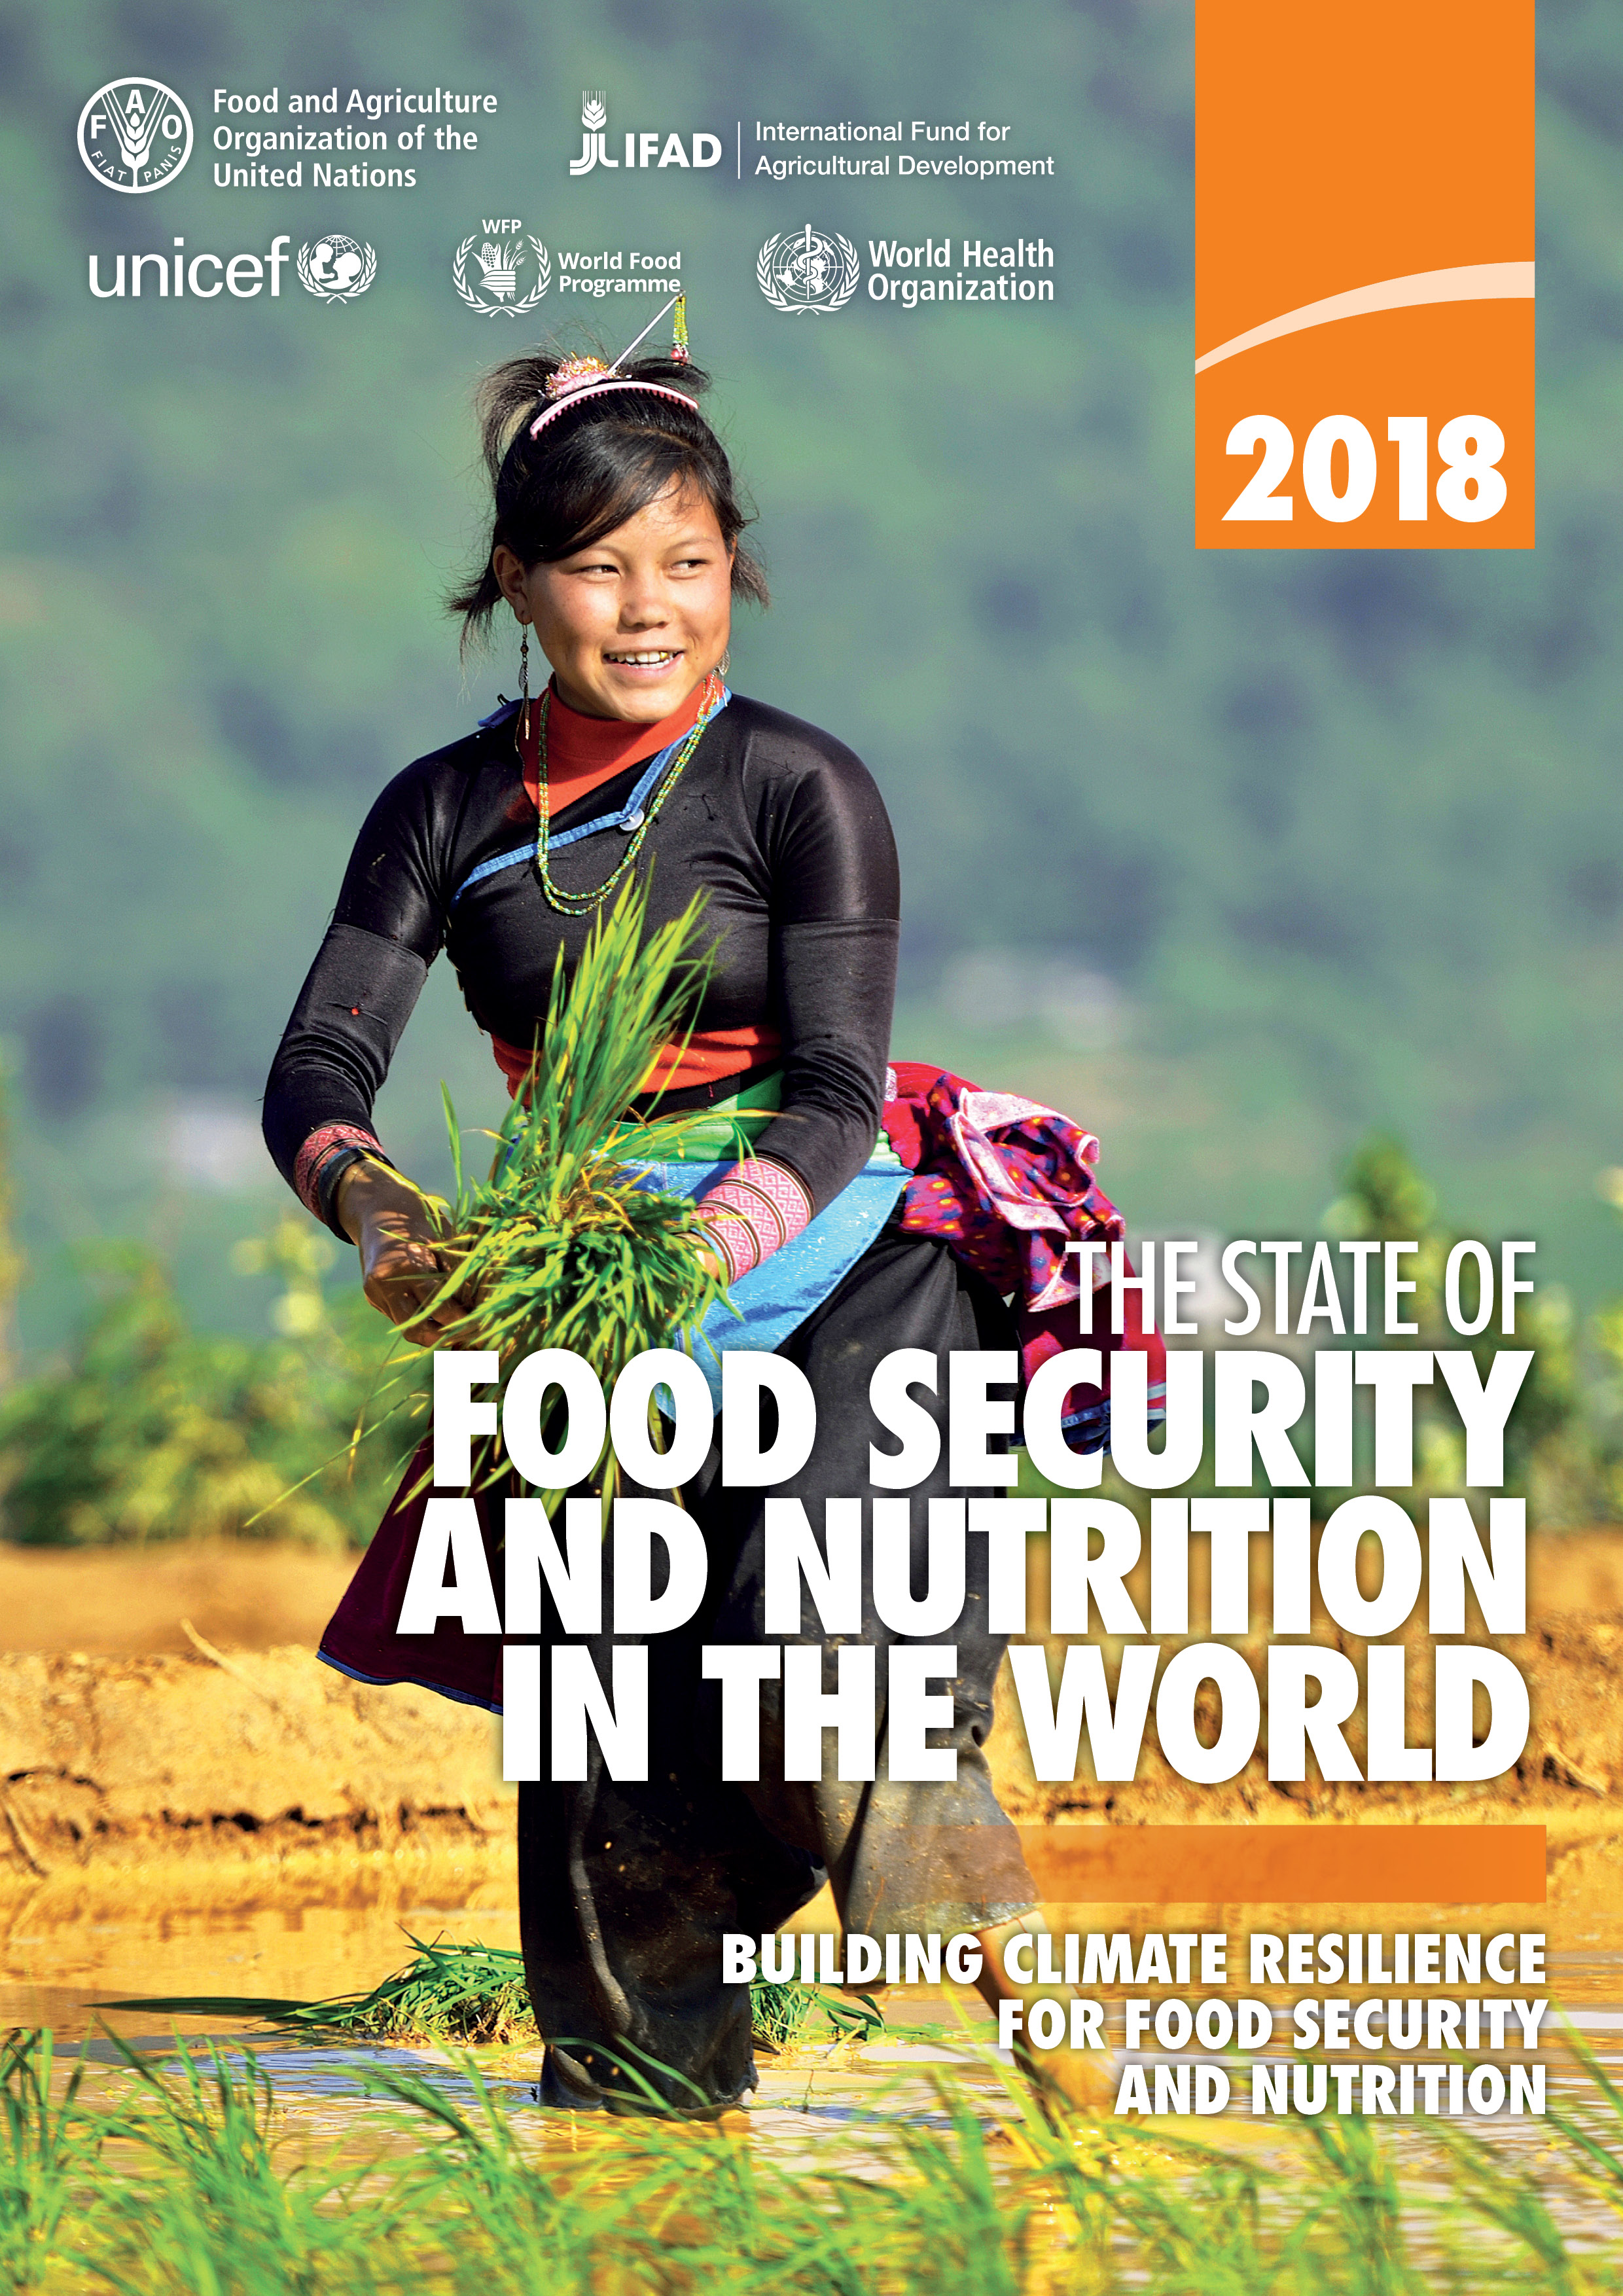 UN to launch new progress report on achieving Zero Hunger